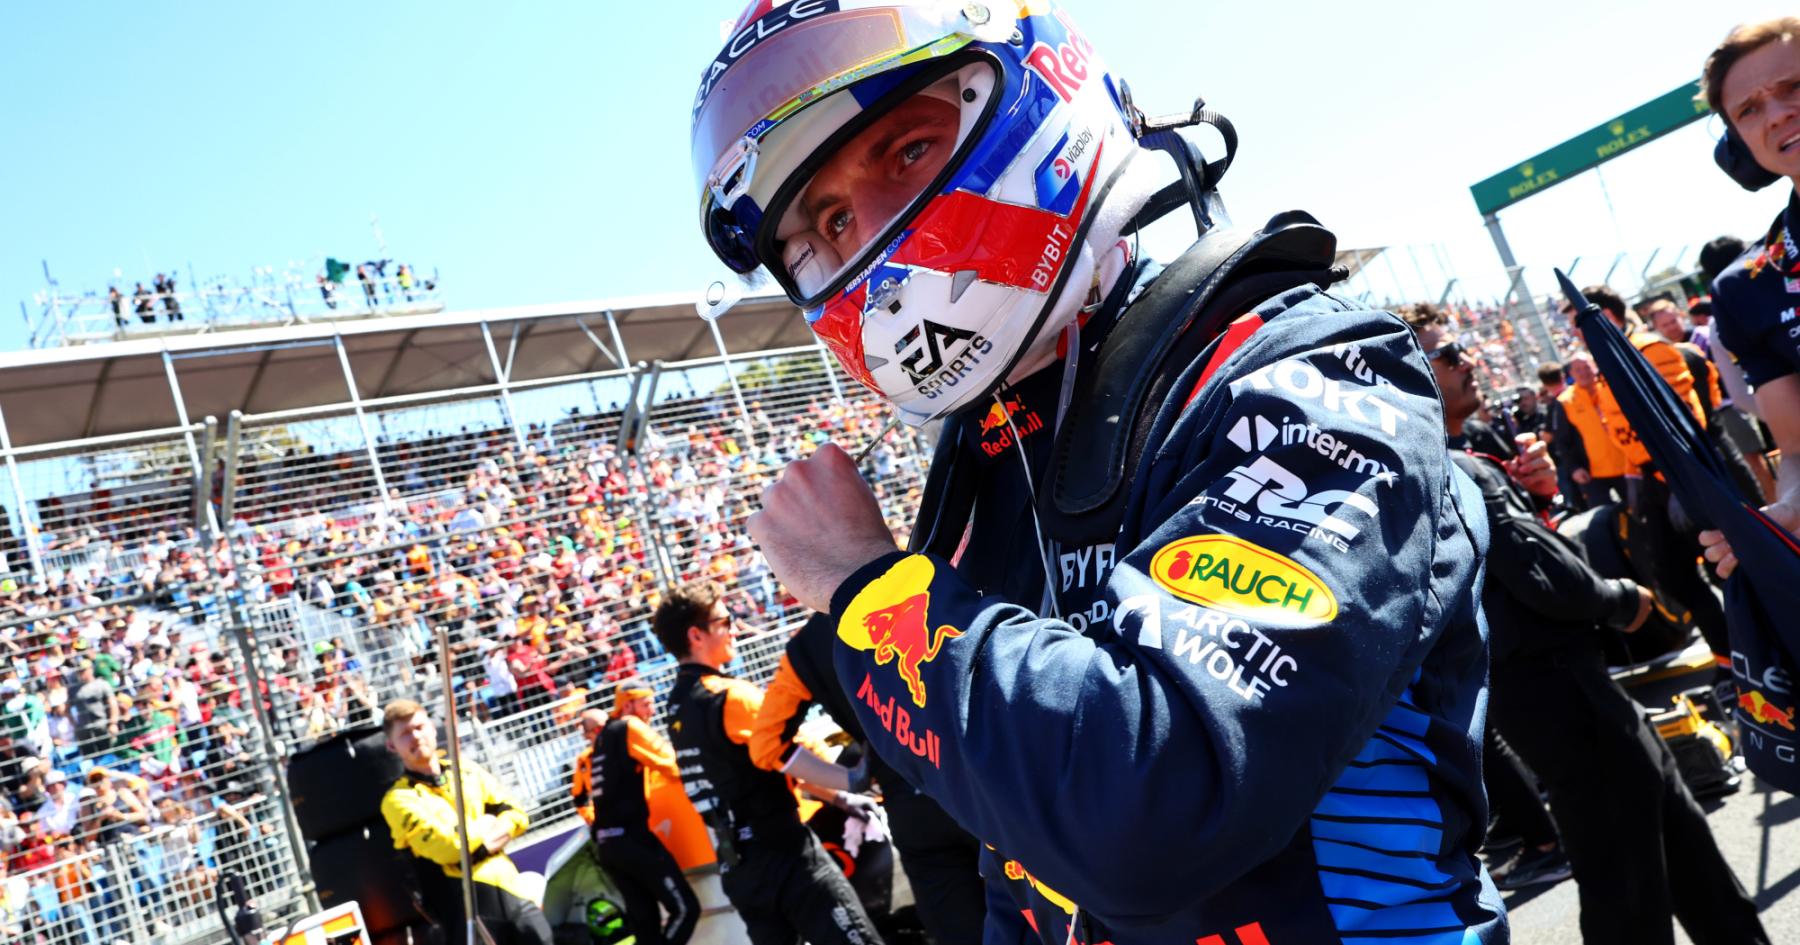 Verstappen's Resilience in Pursuit of Redemption